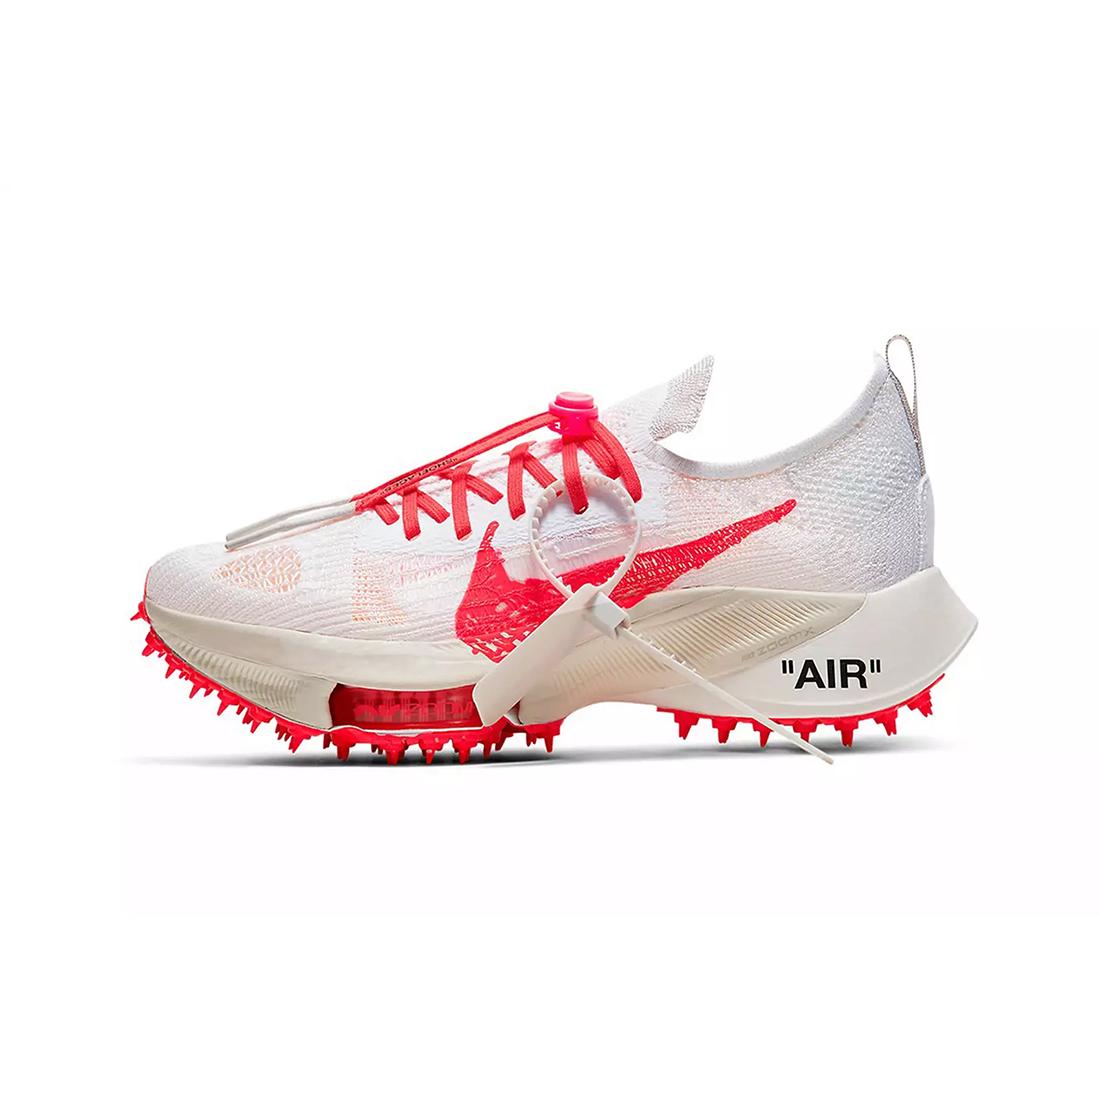 Nike X Off-White Air Zoom Tempo NEXT% Solar Red